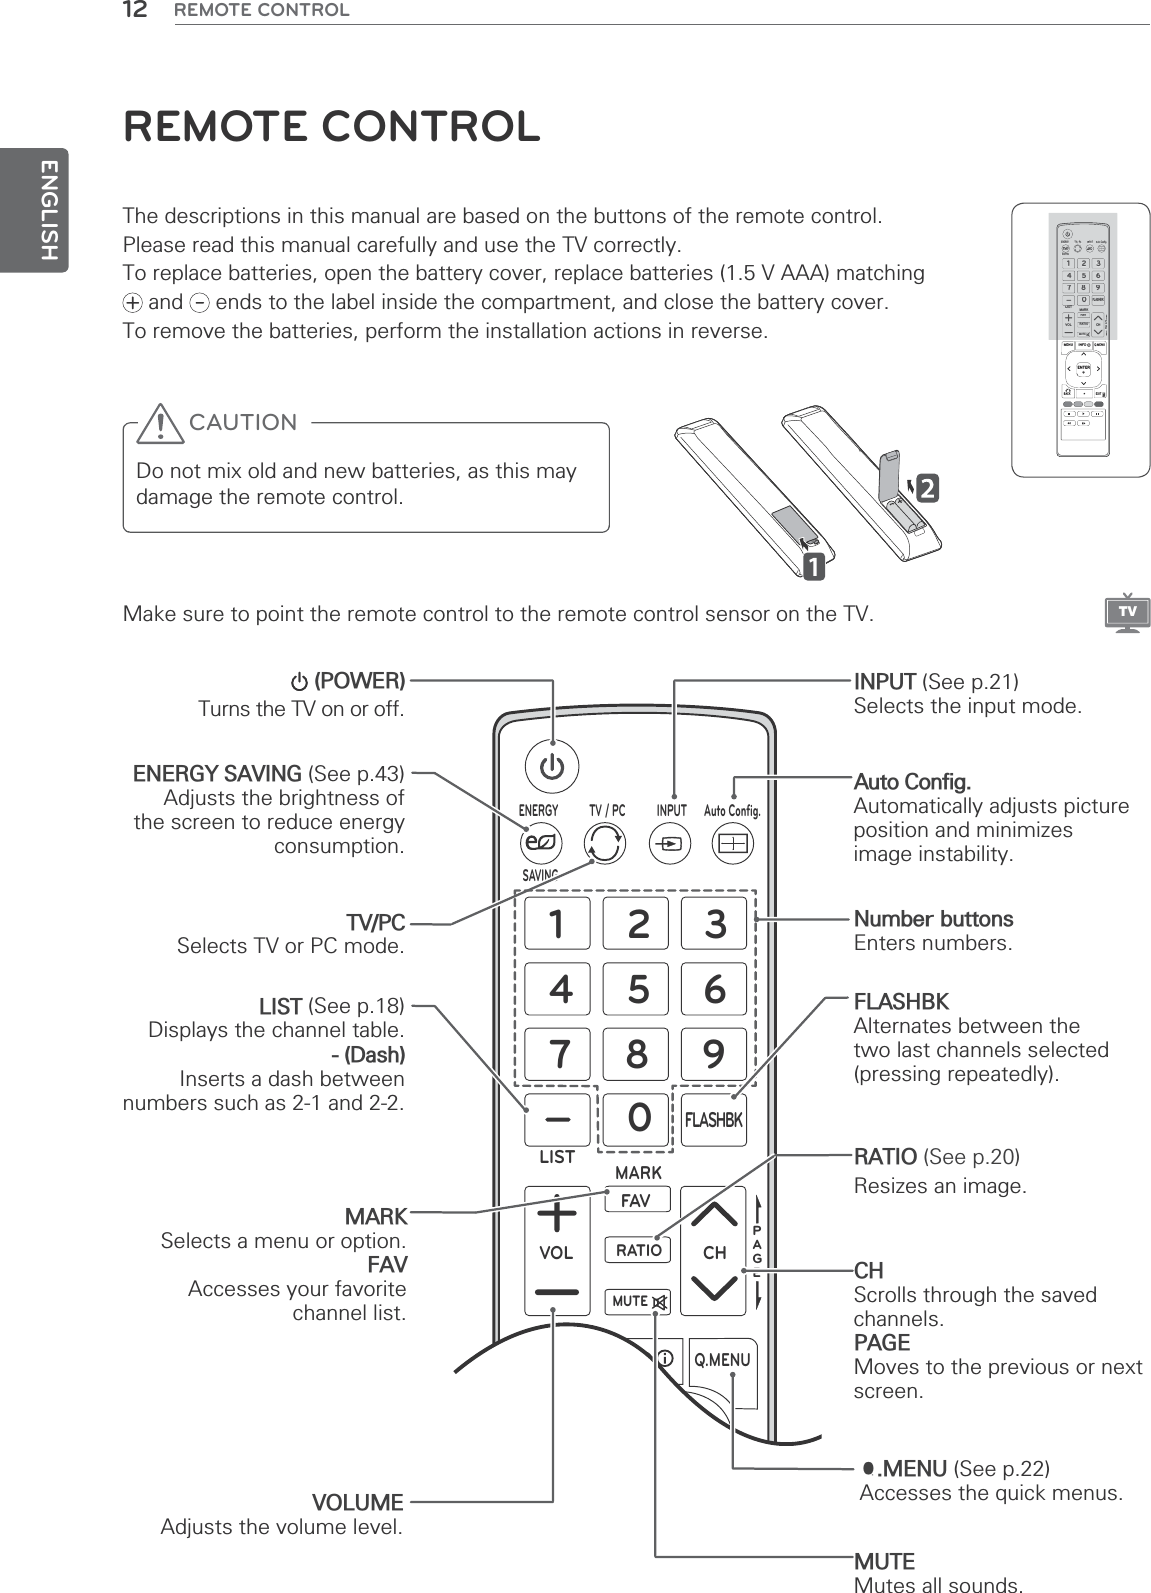 ENGLISH12 REMOTE CONTROLREMOTE CONTROLThe descriptions in this manual are based on the buttons of the remote control. Please read this manual carefully and use the TV correctly.To replace batteries, open the battery cover, replace batteries (1.5 V AAA) matching  and   ends to the label inside the compartment, and close the battery cover.To remove the batteries, perform the installation actions in reverse.Make sure to point the remote control to the remote control sensor on the TV.Do not mix old and new batteries, as this may damage the remote control.PAGE1234506789LISTVOL CHFLASHBKTV / PC INPUT Auto Conﬁg.ENERGY SAVINGMARKFAVRATIOMUTEMENUINFOQ.MENU (POWER)Turns the TV on or off.ENERGY SAVING (See p.43)Adjusts the brightness of the screen to reduce energy consumption. TV/PCSelects TV or PC mode.LIST (See p.18)Displays the channel table.- (Dash)Inserts a dash between numbers such as 2-1 and 2-2.INPUT (See p.21)Selects the input mode.Number buttonsEnters numbers.FLASHBKAlternates between the two last channels selected (pressing repeatedly).PAGE1234506789LISTVOL CHFLASHBKTV / PC INPUT Auto Conﬁg.ENERGY SAVINGMARKFAVRATIOMUTEENTERMENUINFOQ.MENUBACKEXITPAGE1234506789LISTVOL CHFLASHBKTV / PCINPUTAuto Conﬁg.ENERGY SAVINGMARKFAVRATIOMUTEMARKSelects a menu or option.FAVAccesses your favorite channel list.VOLUMEAdjusts the volume level.RATIO (See p.20)Resizes an image.CH Scrolls through the saved channels.PAGE Moves to the previous or next screen.MUTEMutes all sounds.Q.MENU (See p.22)Accesses the quick menus. TVAuto Config.Automatically adjusts picture position and minimizesimage instability.CAUTION